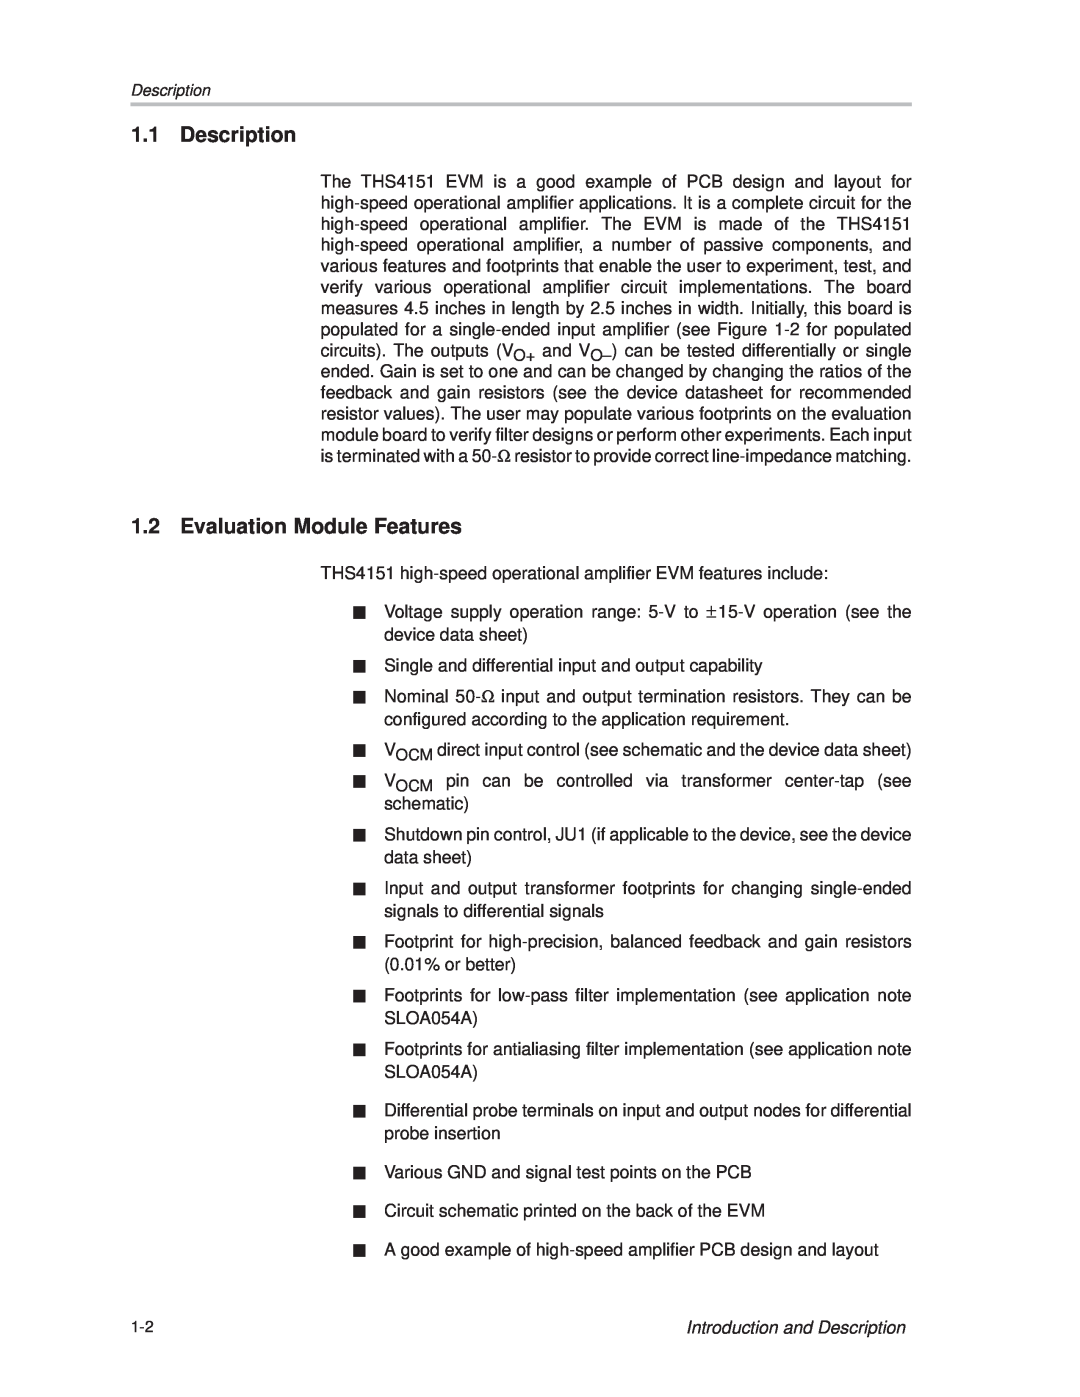 Texas Instruments THS4151 manual Evaluation Module Features, Introduction and Description 